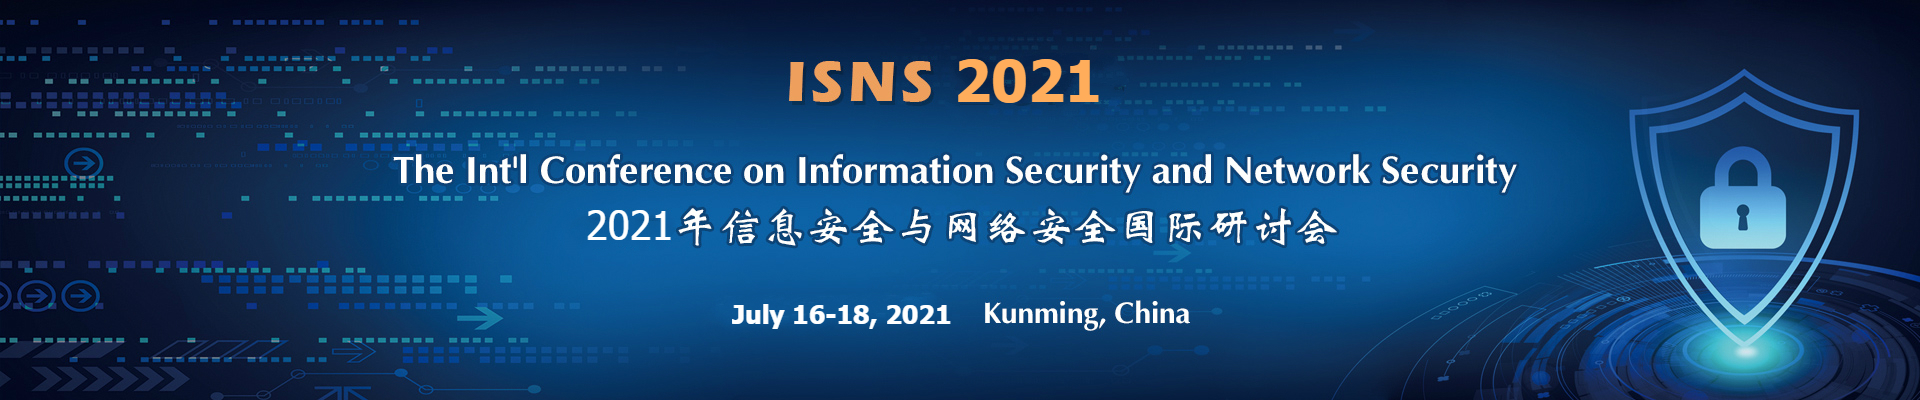 Int'l Conference on Information Security and Network Security (ISNS 2021), Kunming, Yunnan, China